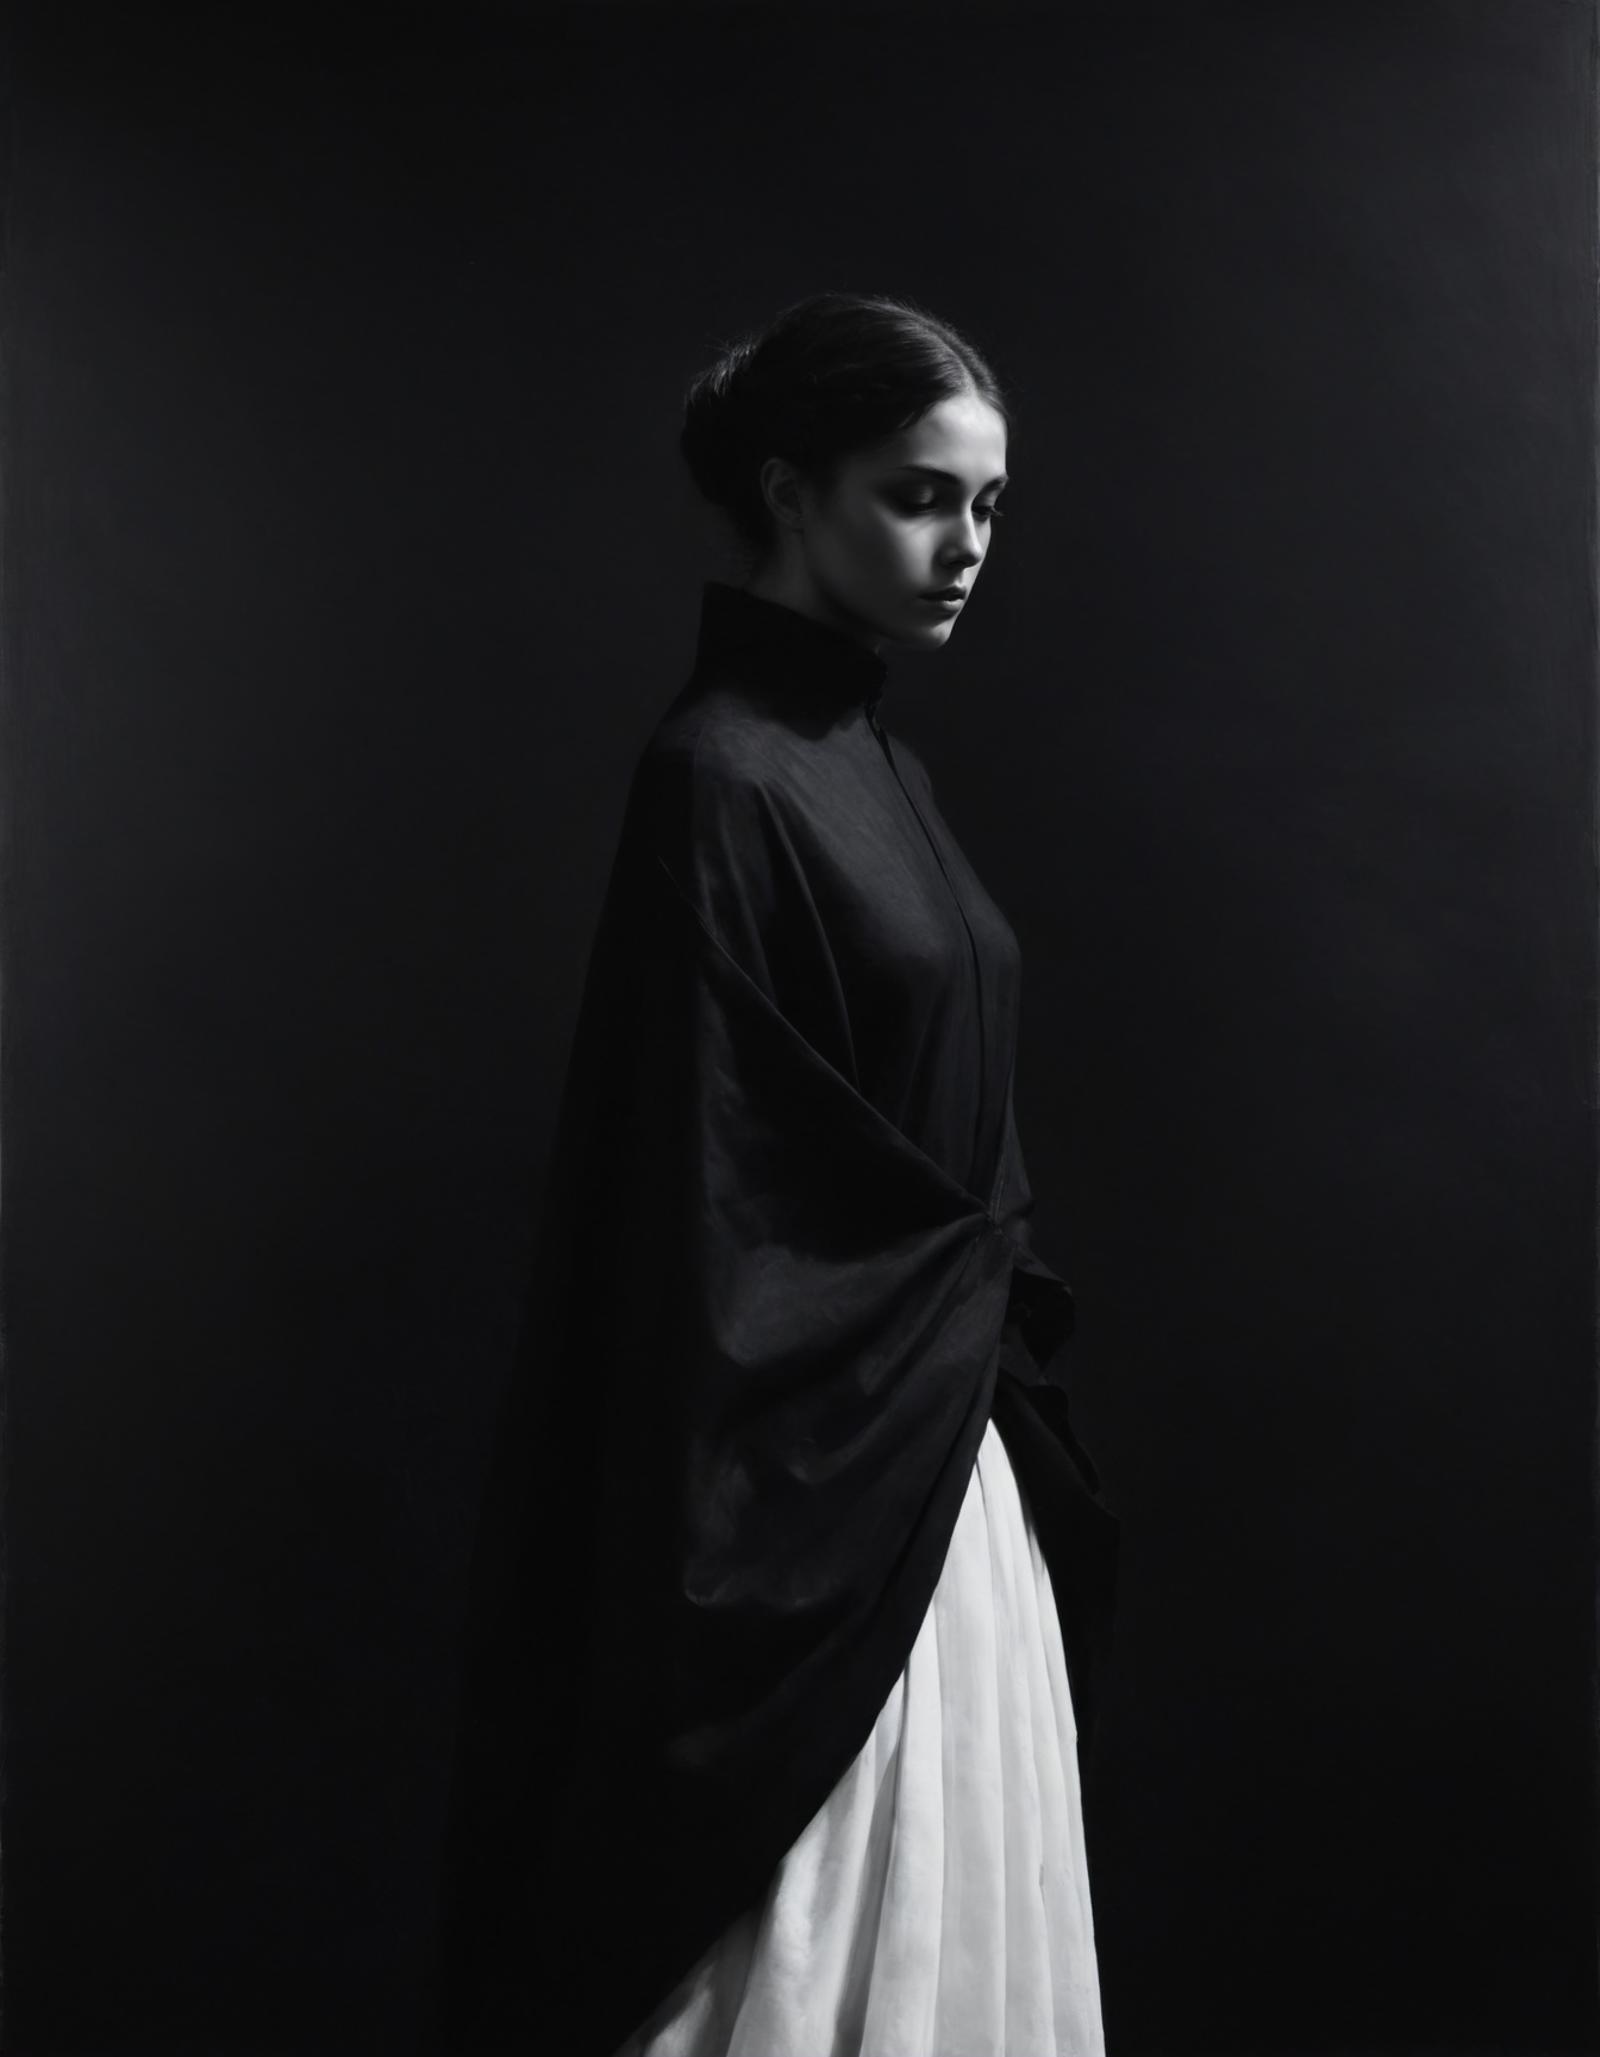 A woman in a long black dress standing in a dark room.